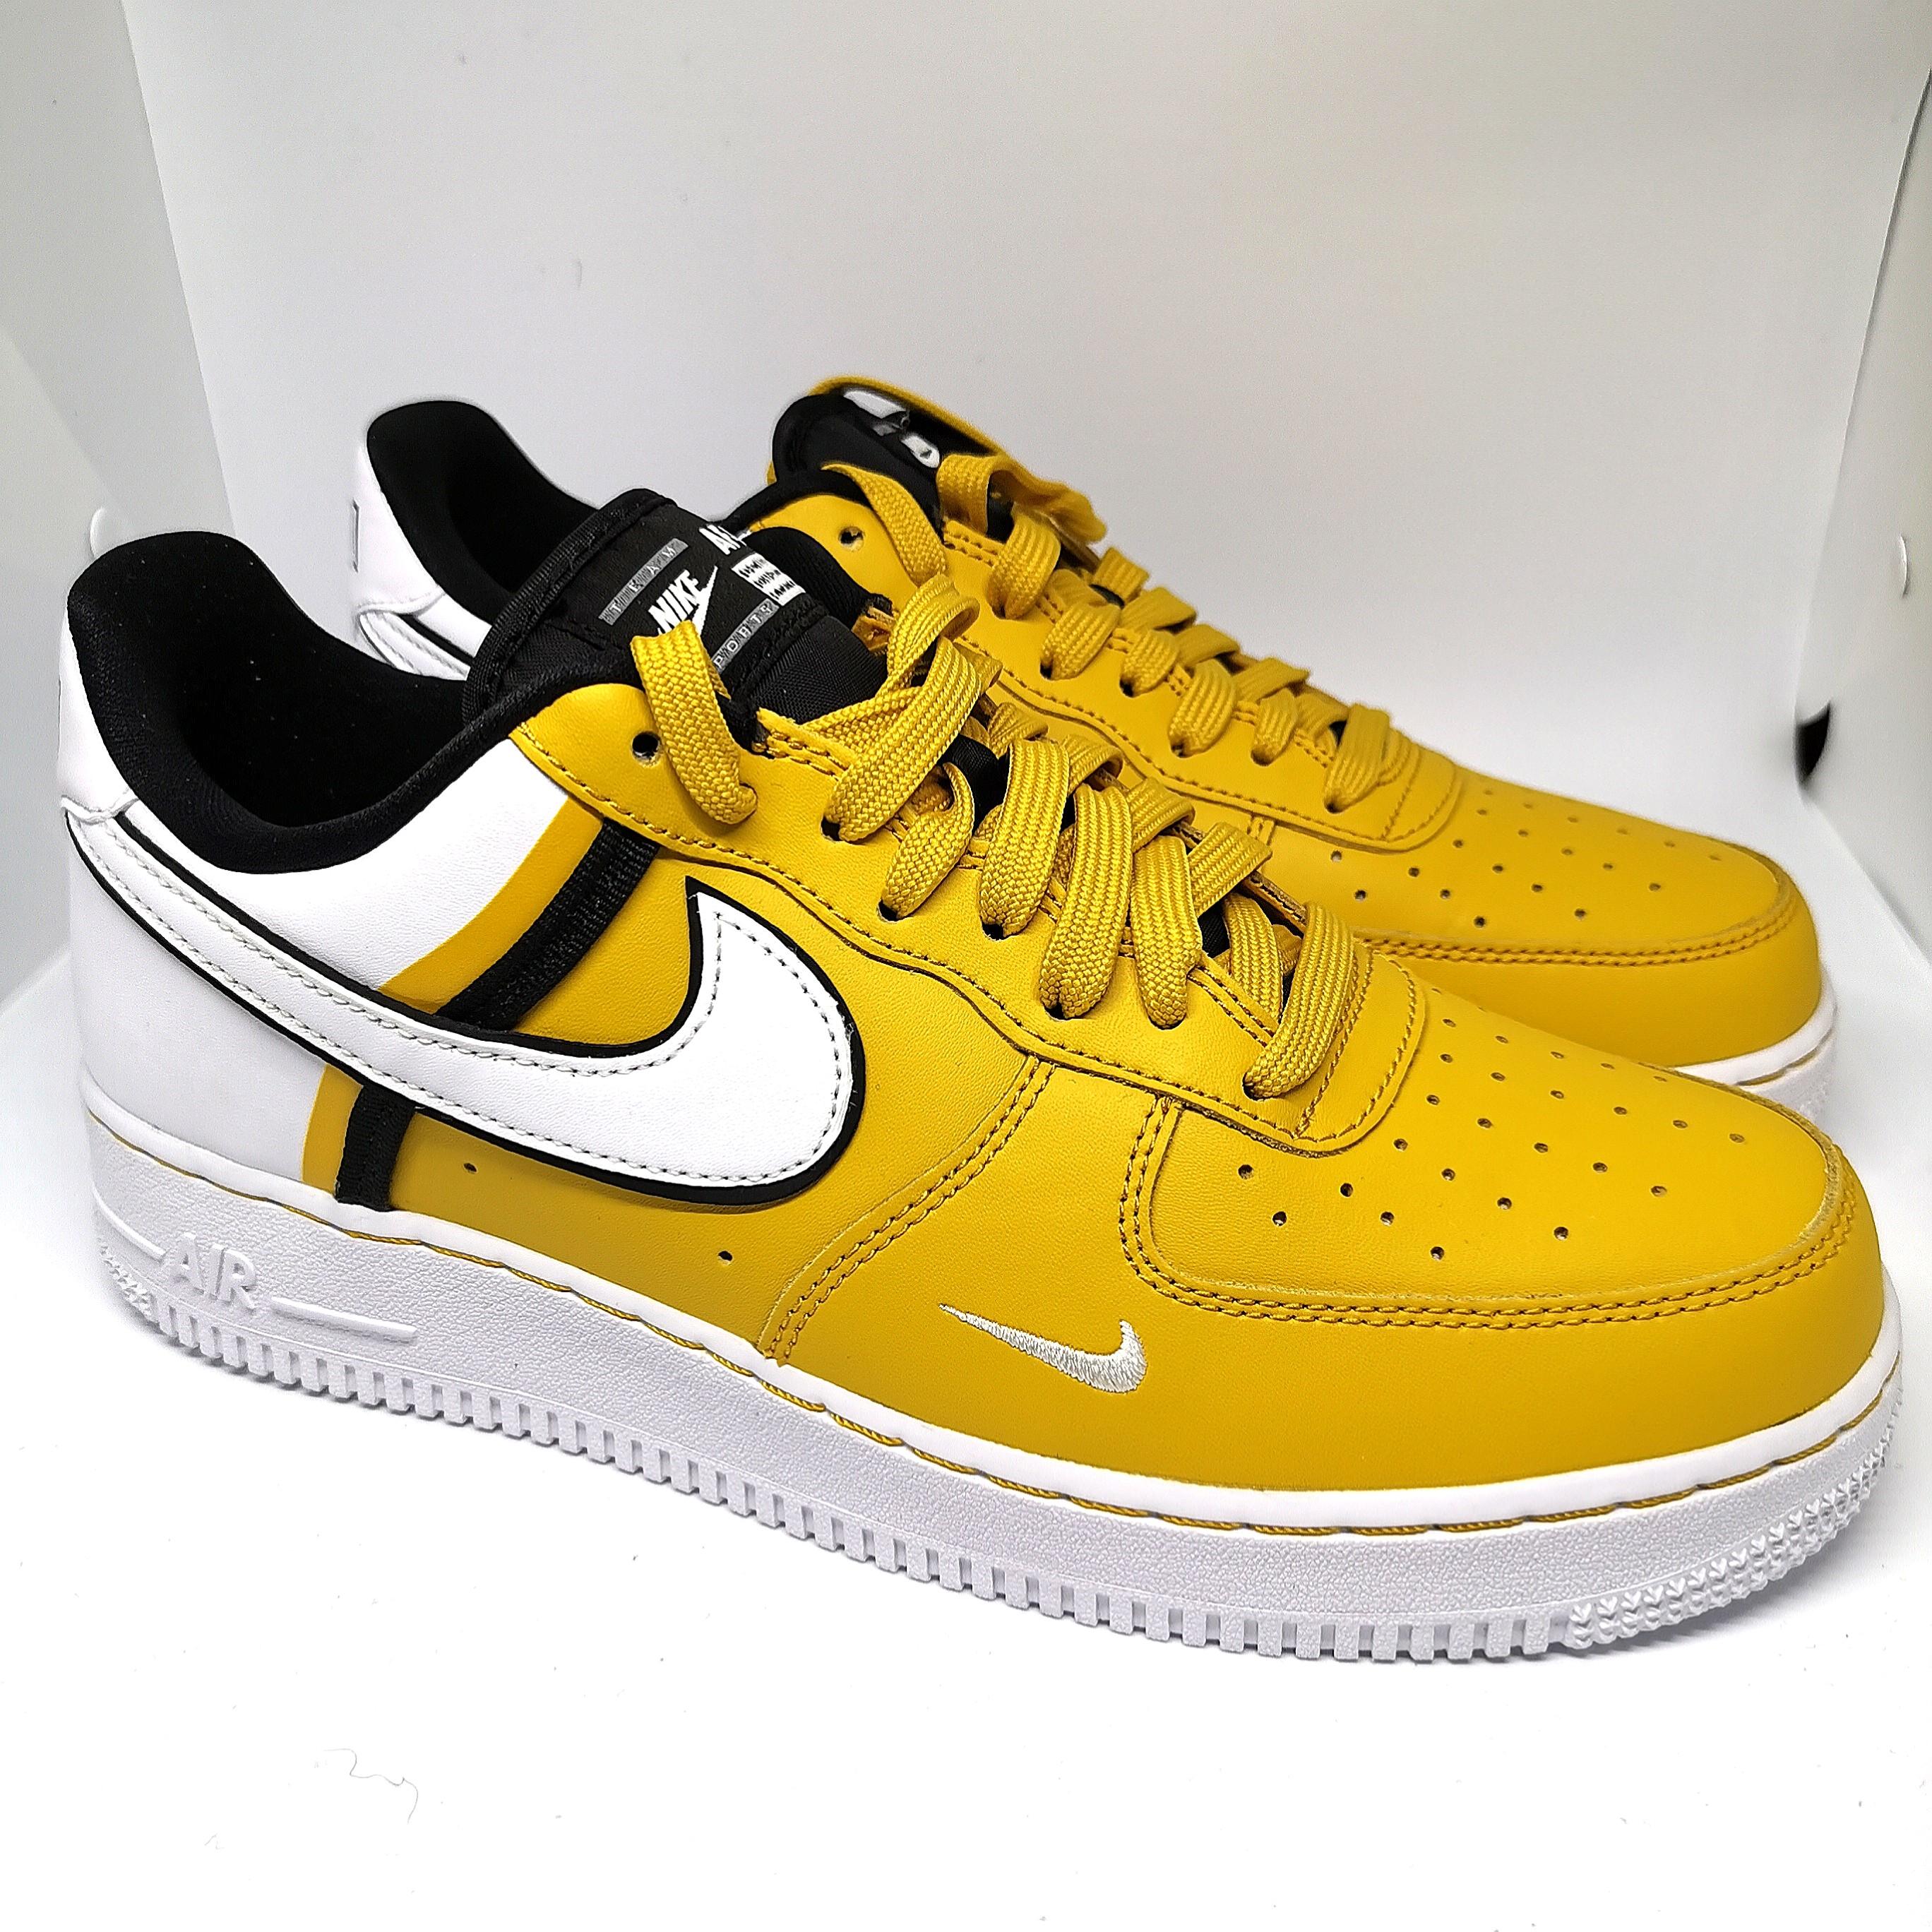 US 8.5) Nike Air Force 1 '07 V8 2, Men's Fashion, Footwear, Sneakers on  Carousell